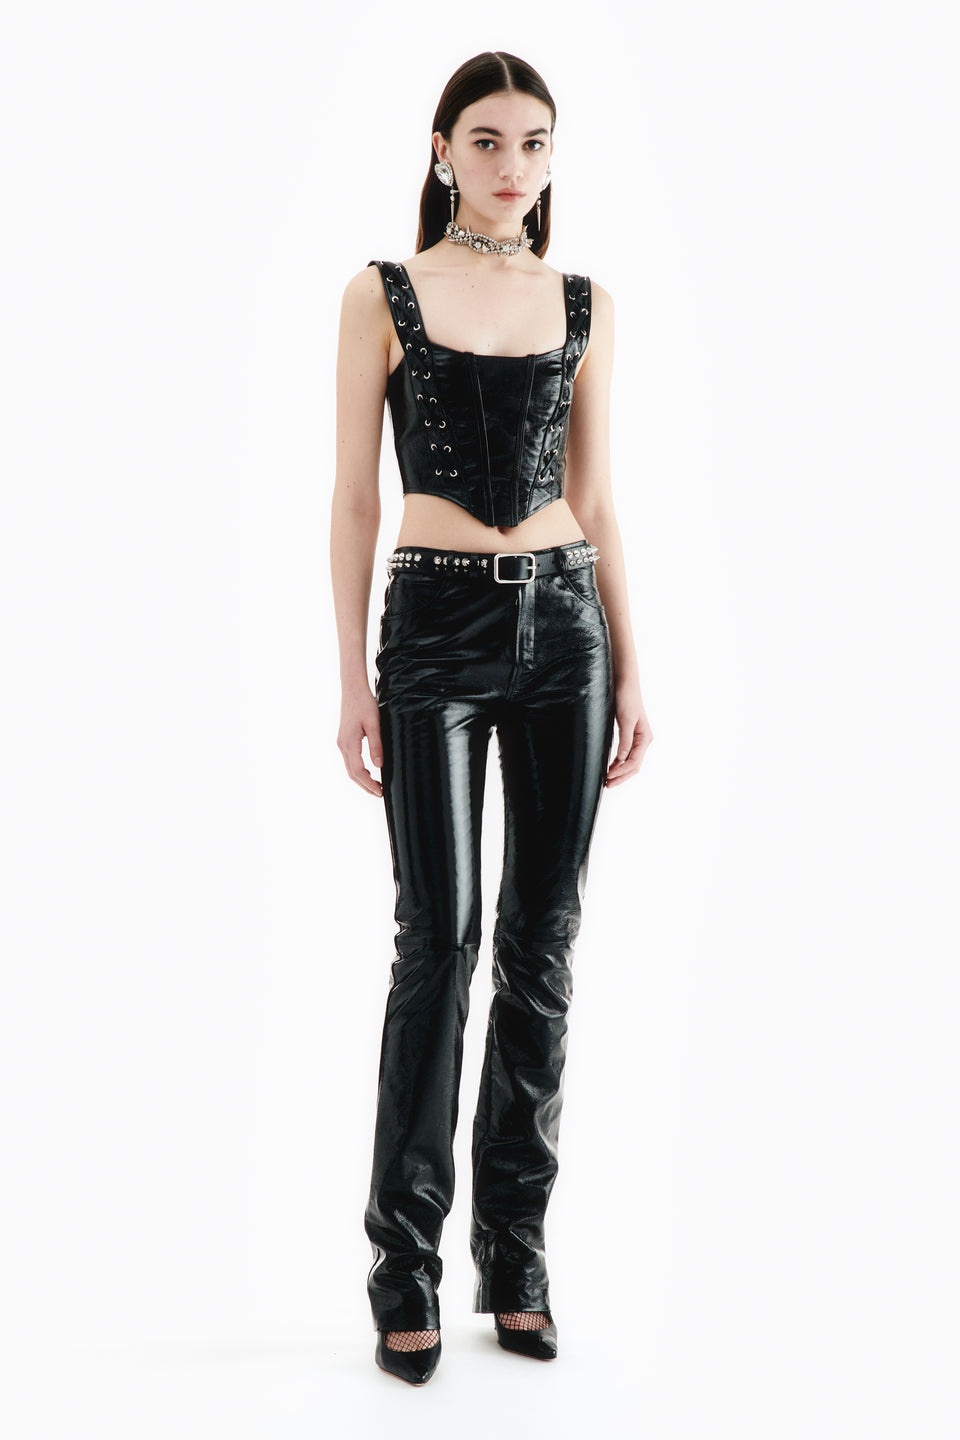 PATENT LEATHER BUSTIER - 3